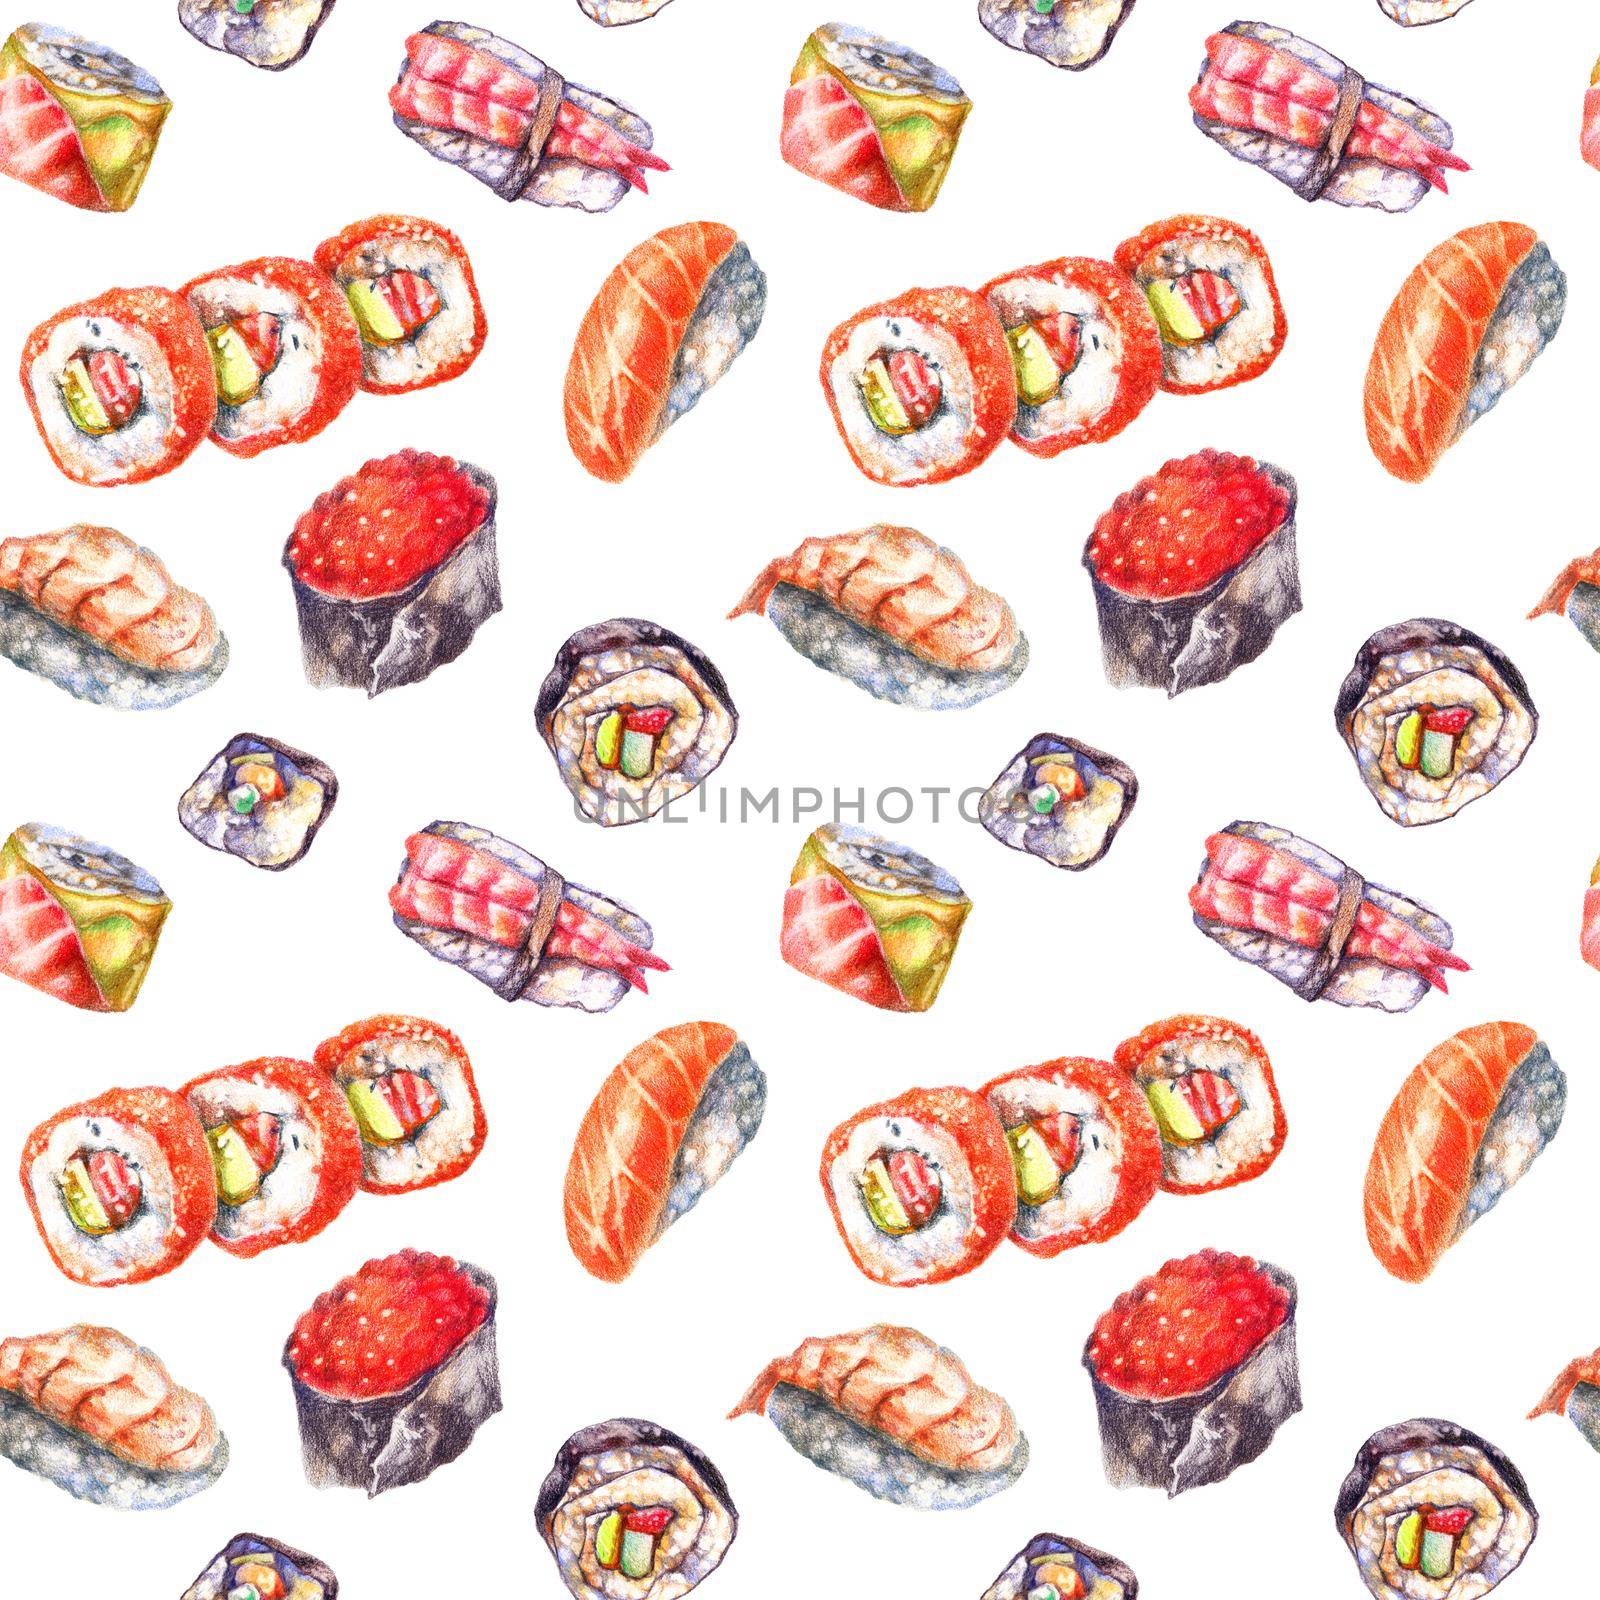 Color pencils realistic illustration of asian seafood - sushi and rolls. Seamless pattern. Hand-drawn objects on white background.